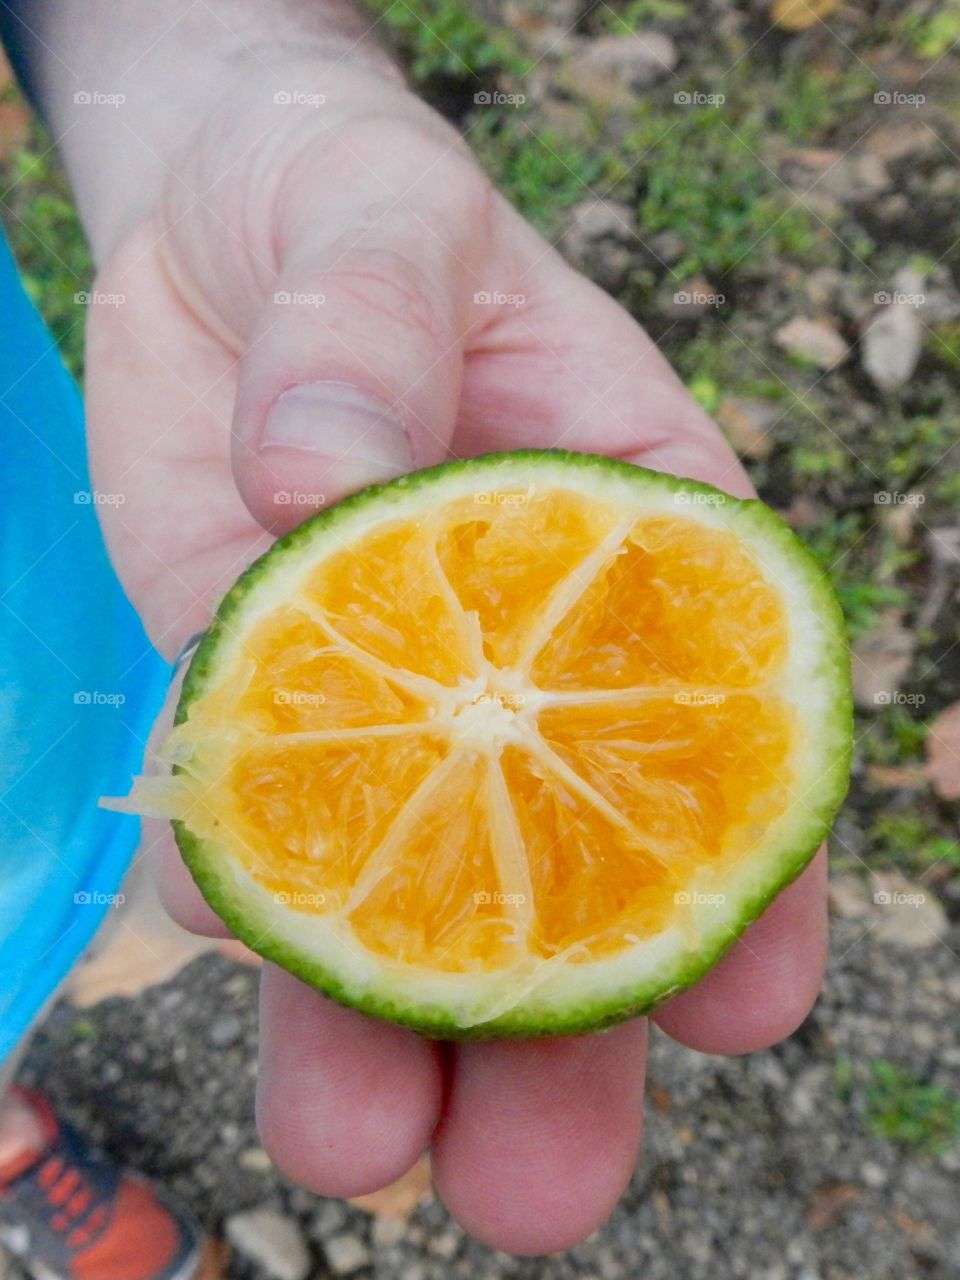 This green orange looking fruit is sour and delicious in cocktails 